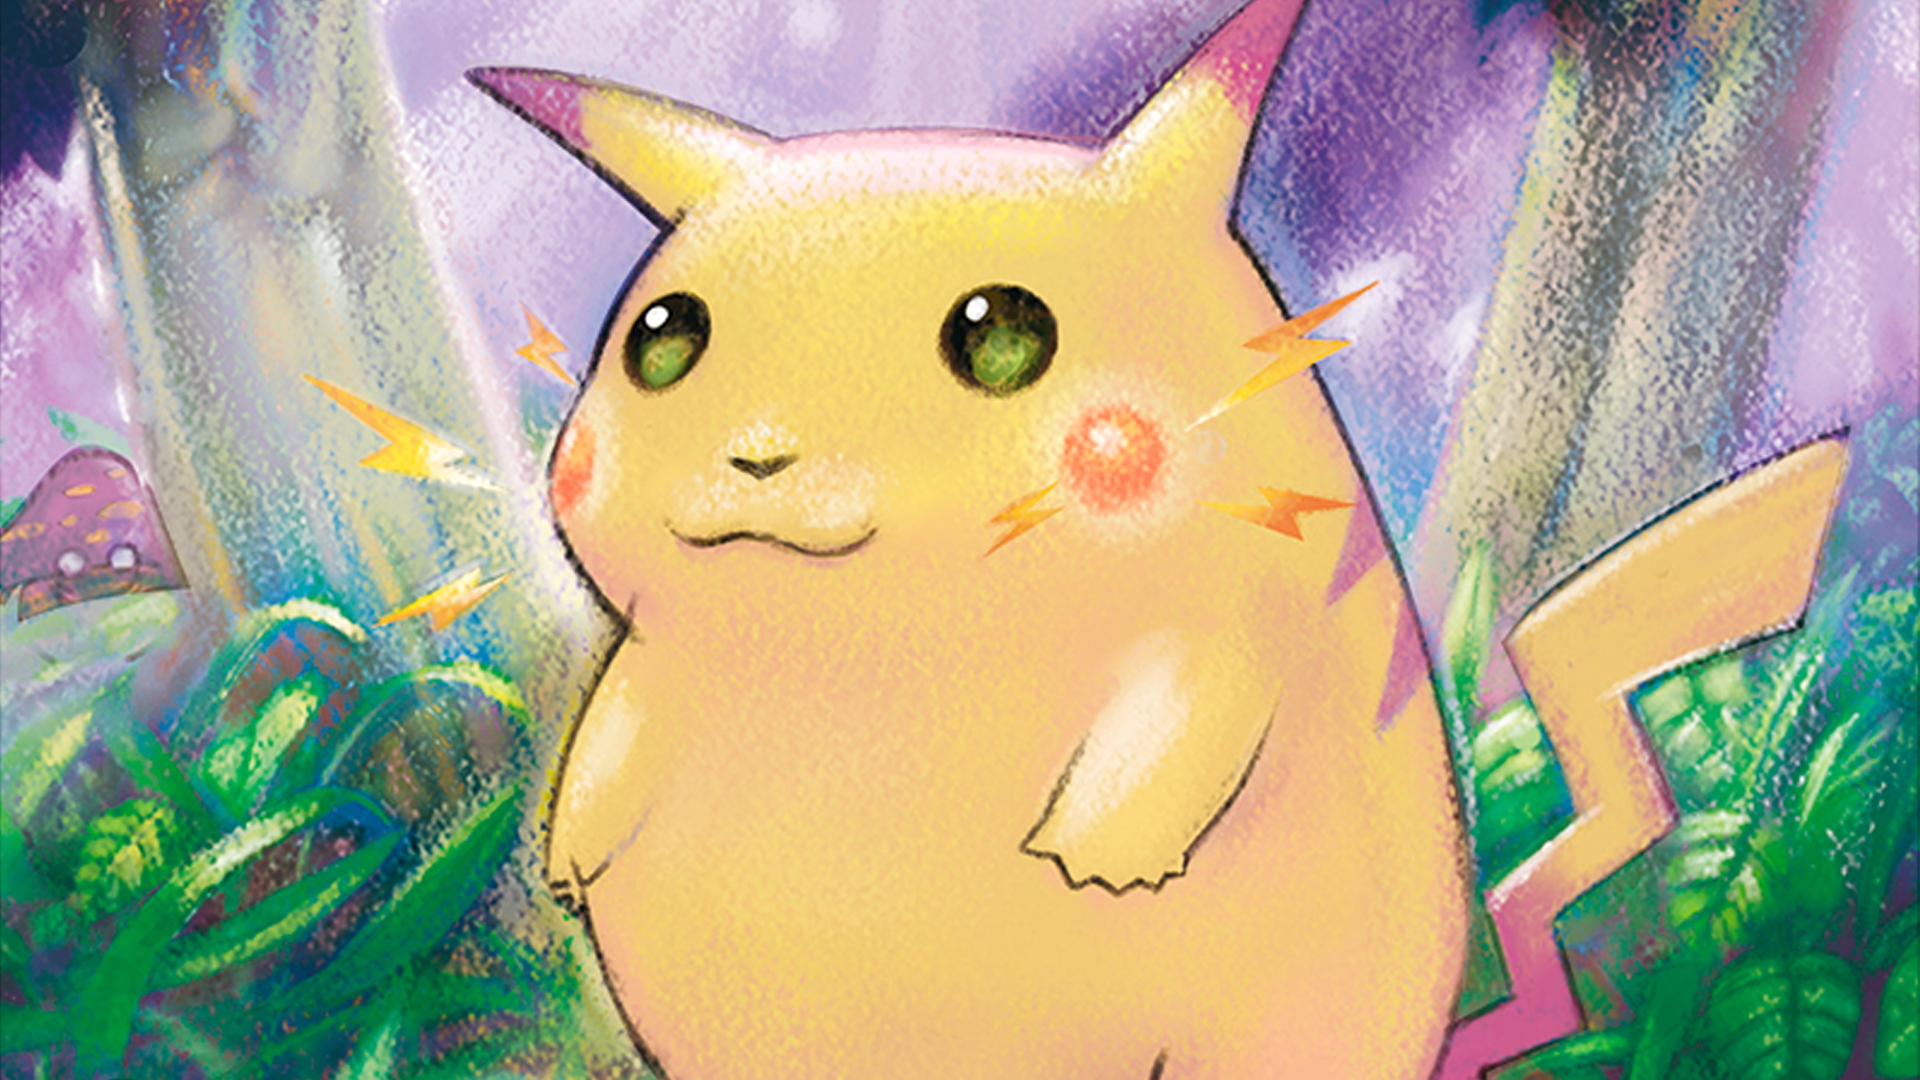 Pokémon TCG's 25th anniversary set will include remakes of iconic Pikachu  cards | Dicebreaker